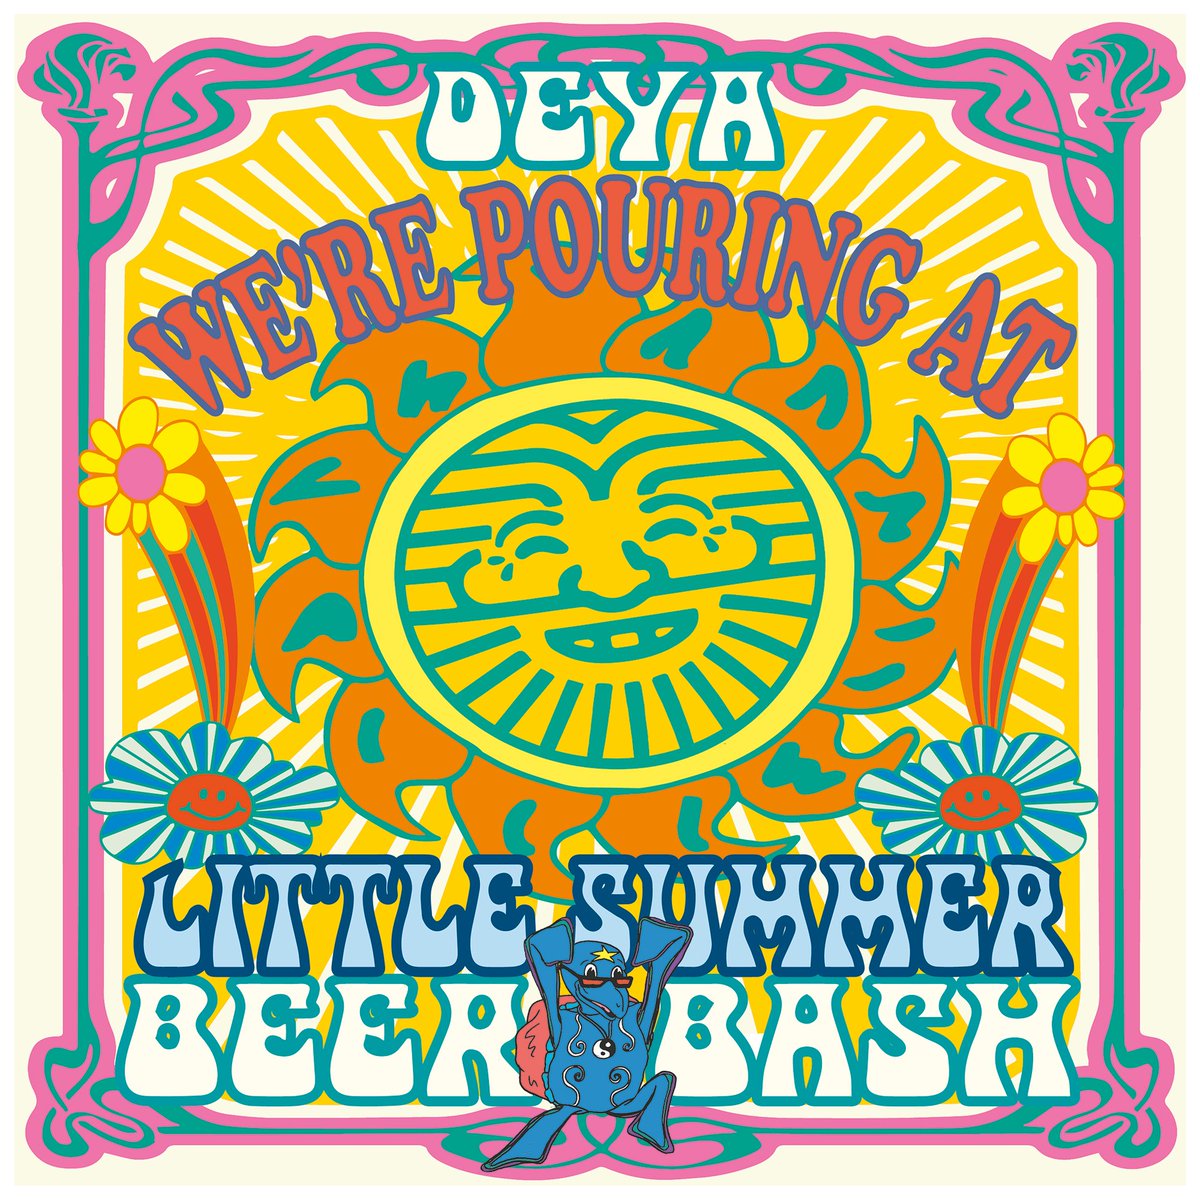 We're headed to Little Summer Beer Bash! 🌞🍻 Hosted by @deyabrewery, @VerdantBrew, and @LHGBrewingco it's going to be one hot Saturday 27th July! Just a reminder that tickets are sold out already, but hope to see you lucky few there. ☮️😎🪅🌻